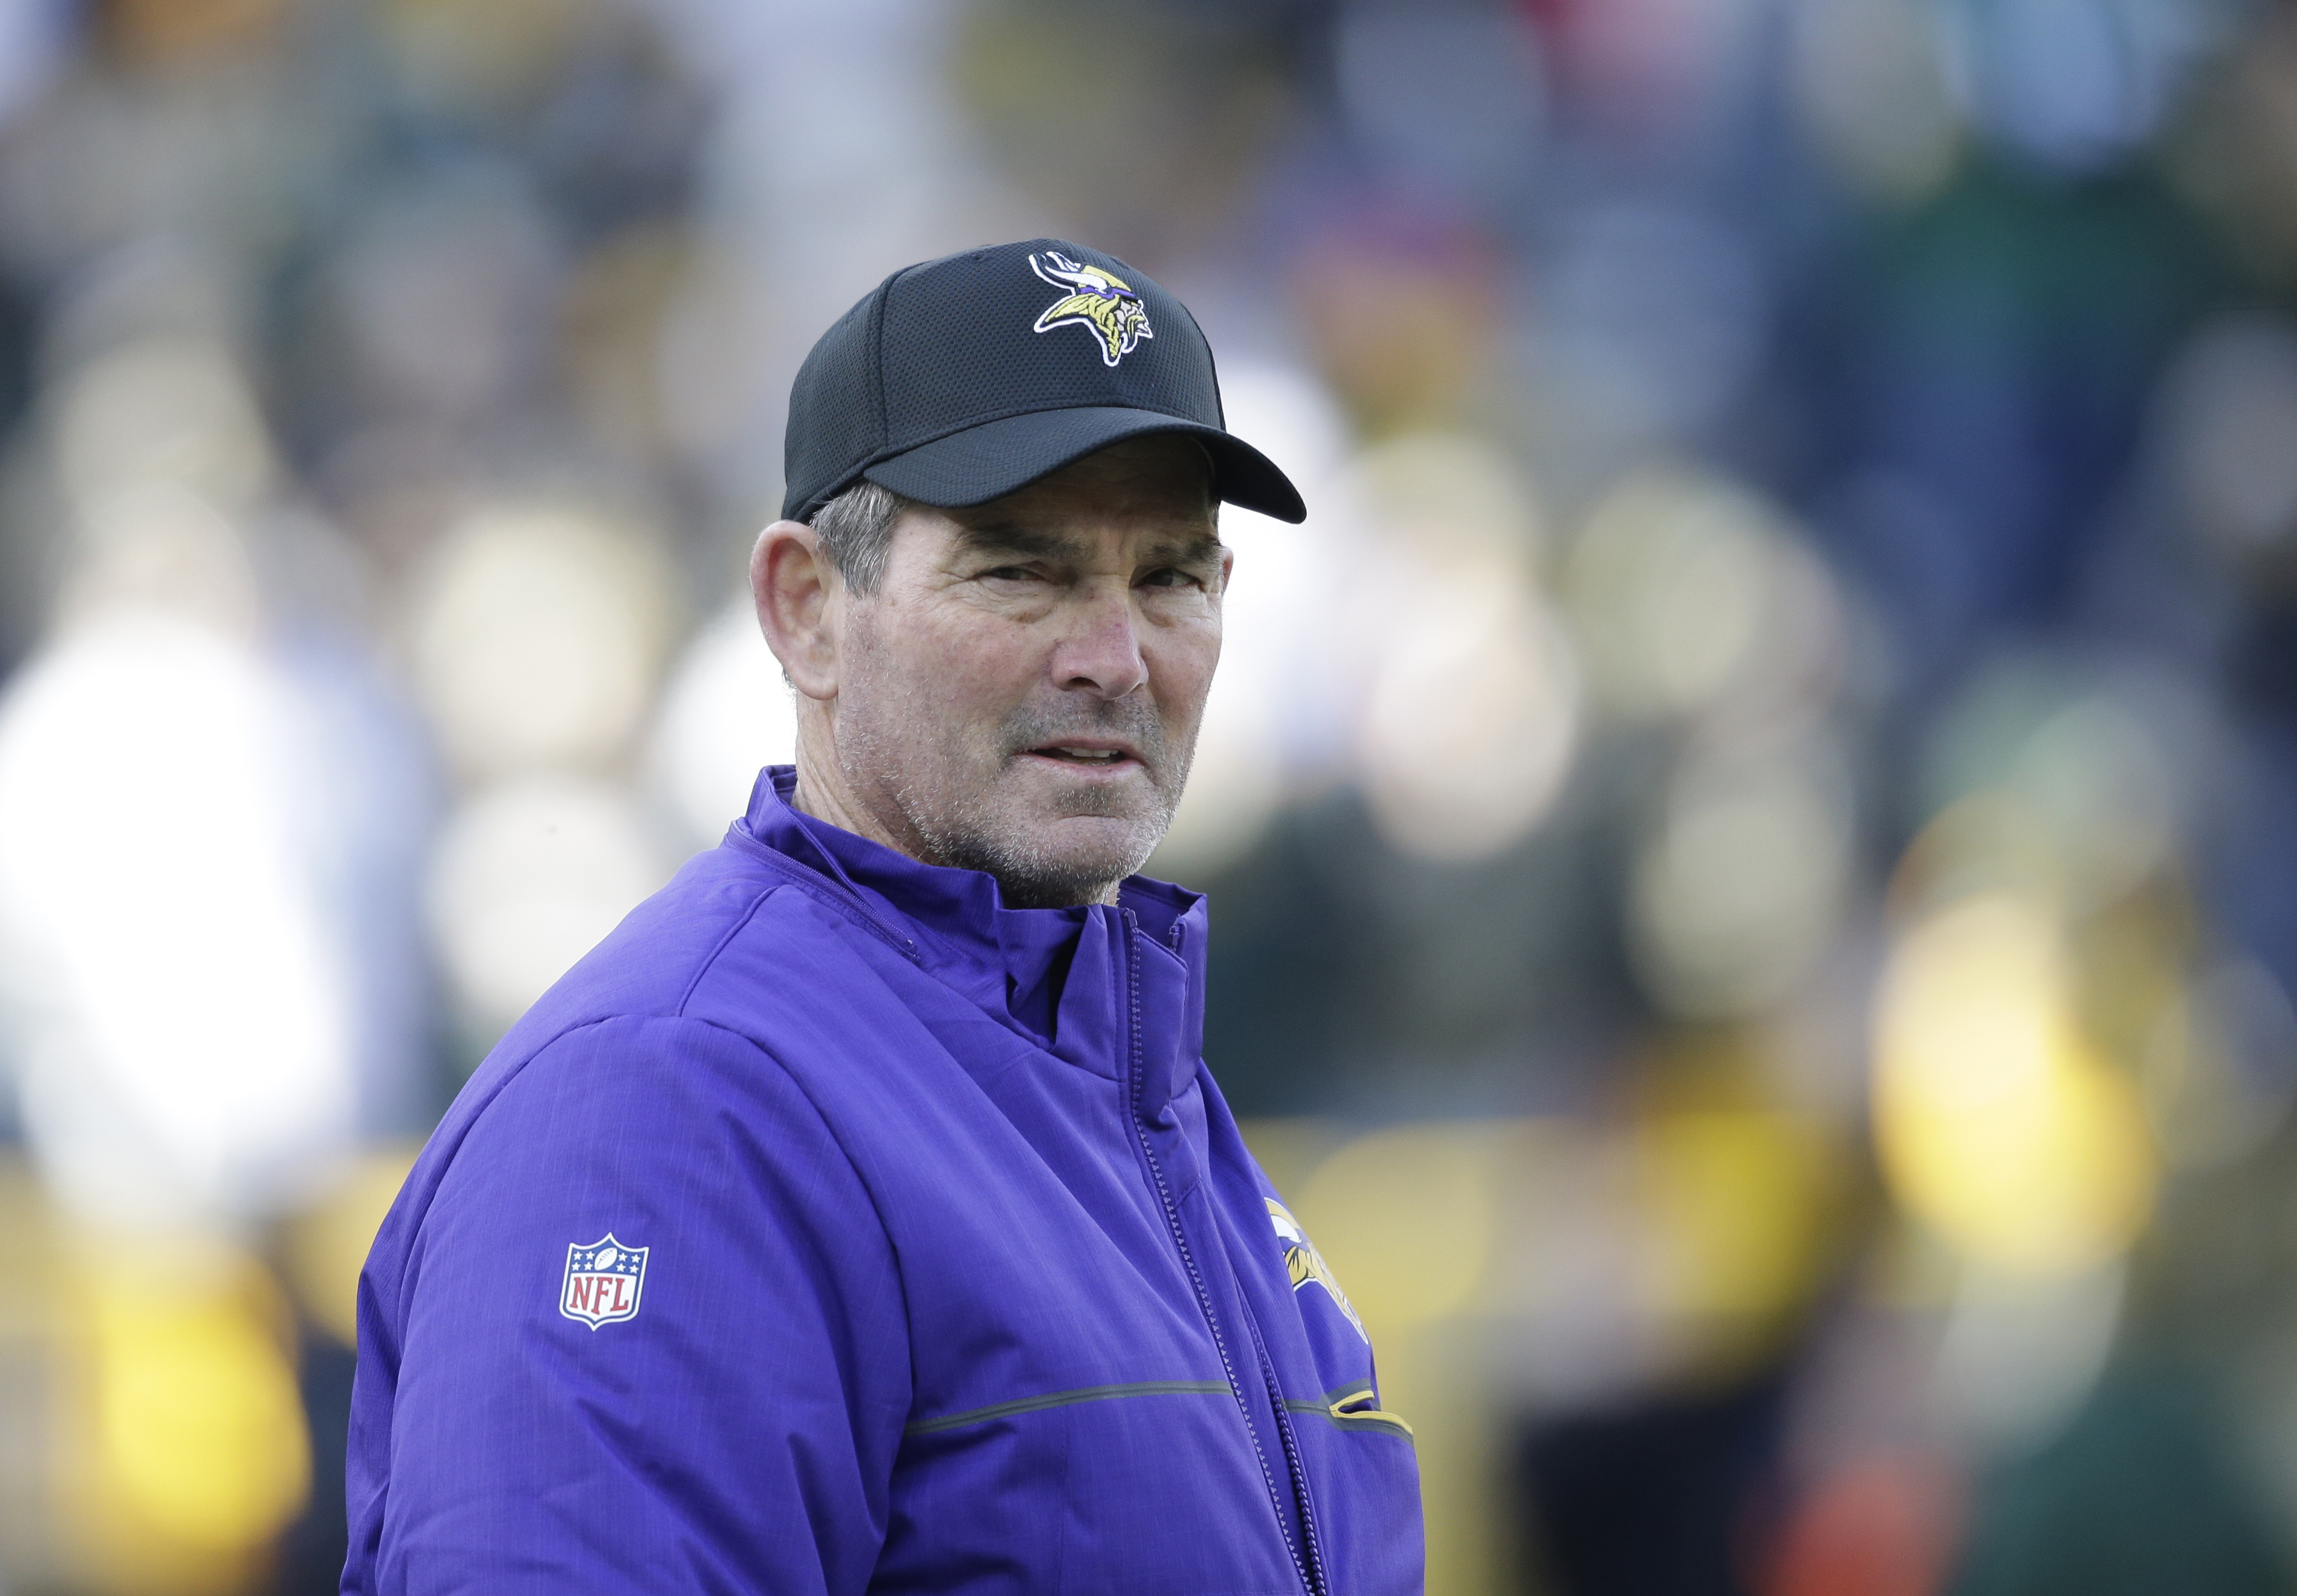 Minnesota Vikings head coach Mike Zimmer before an NFL football game against the Green Bay Packers Saturday, Dec. 24, 2016, in Green Bay, Wis. (AP Photo/Jeffrey Phelps)